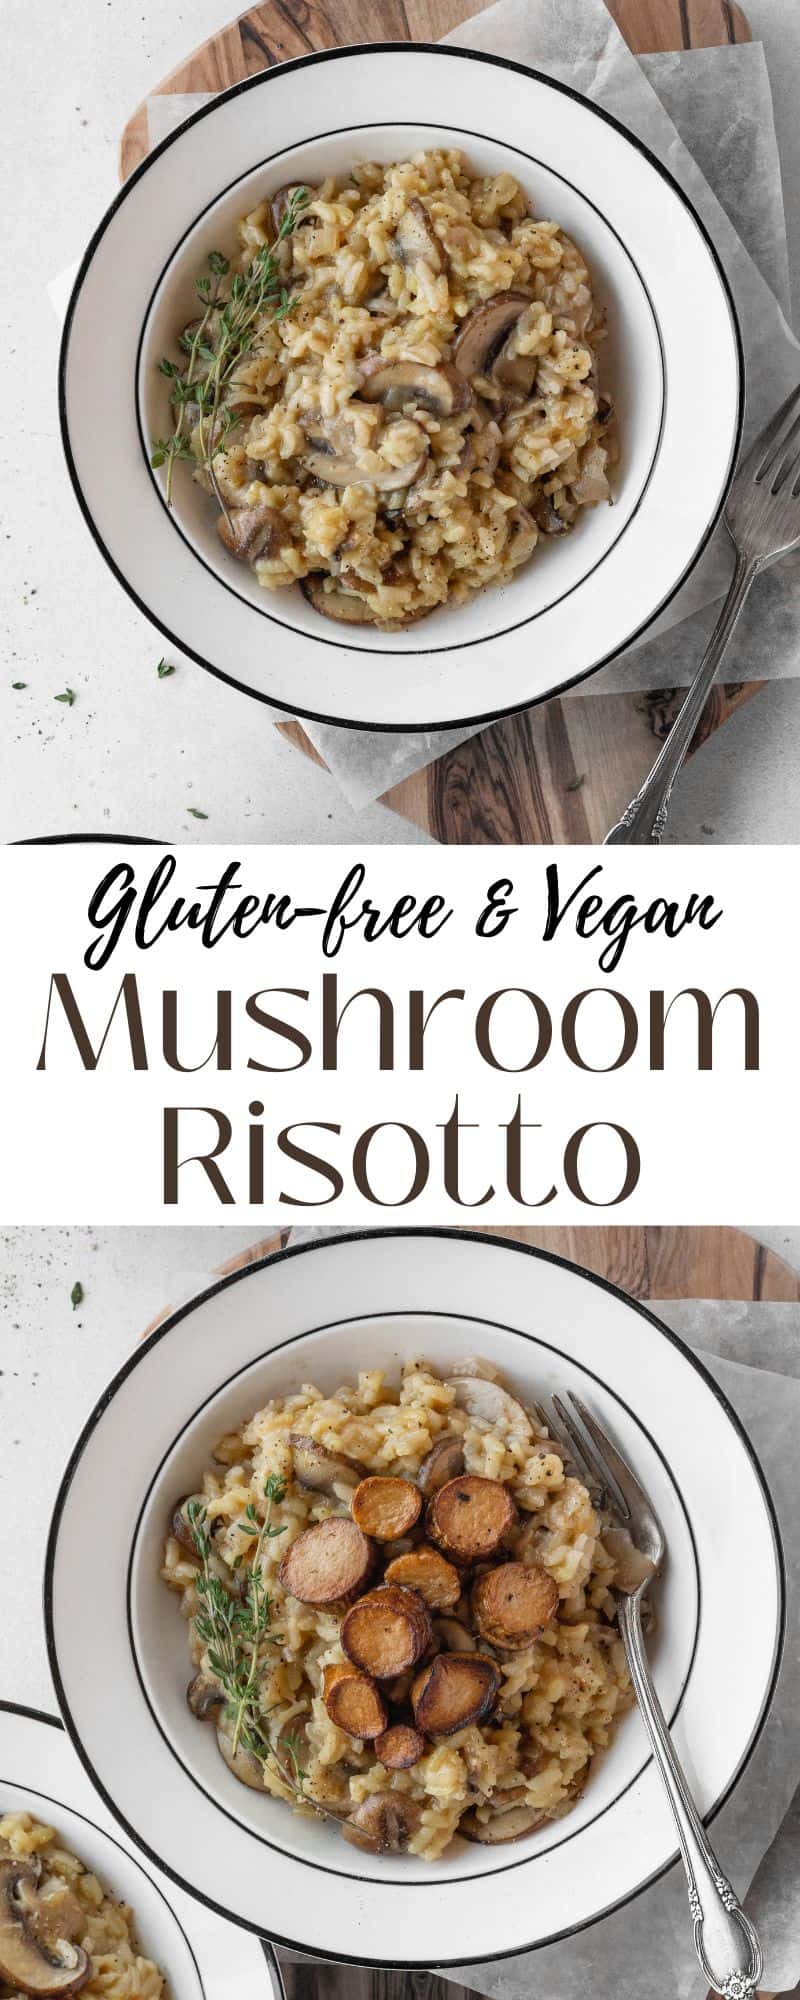 Vegan risotto with mushrooms on white plates.